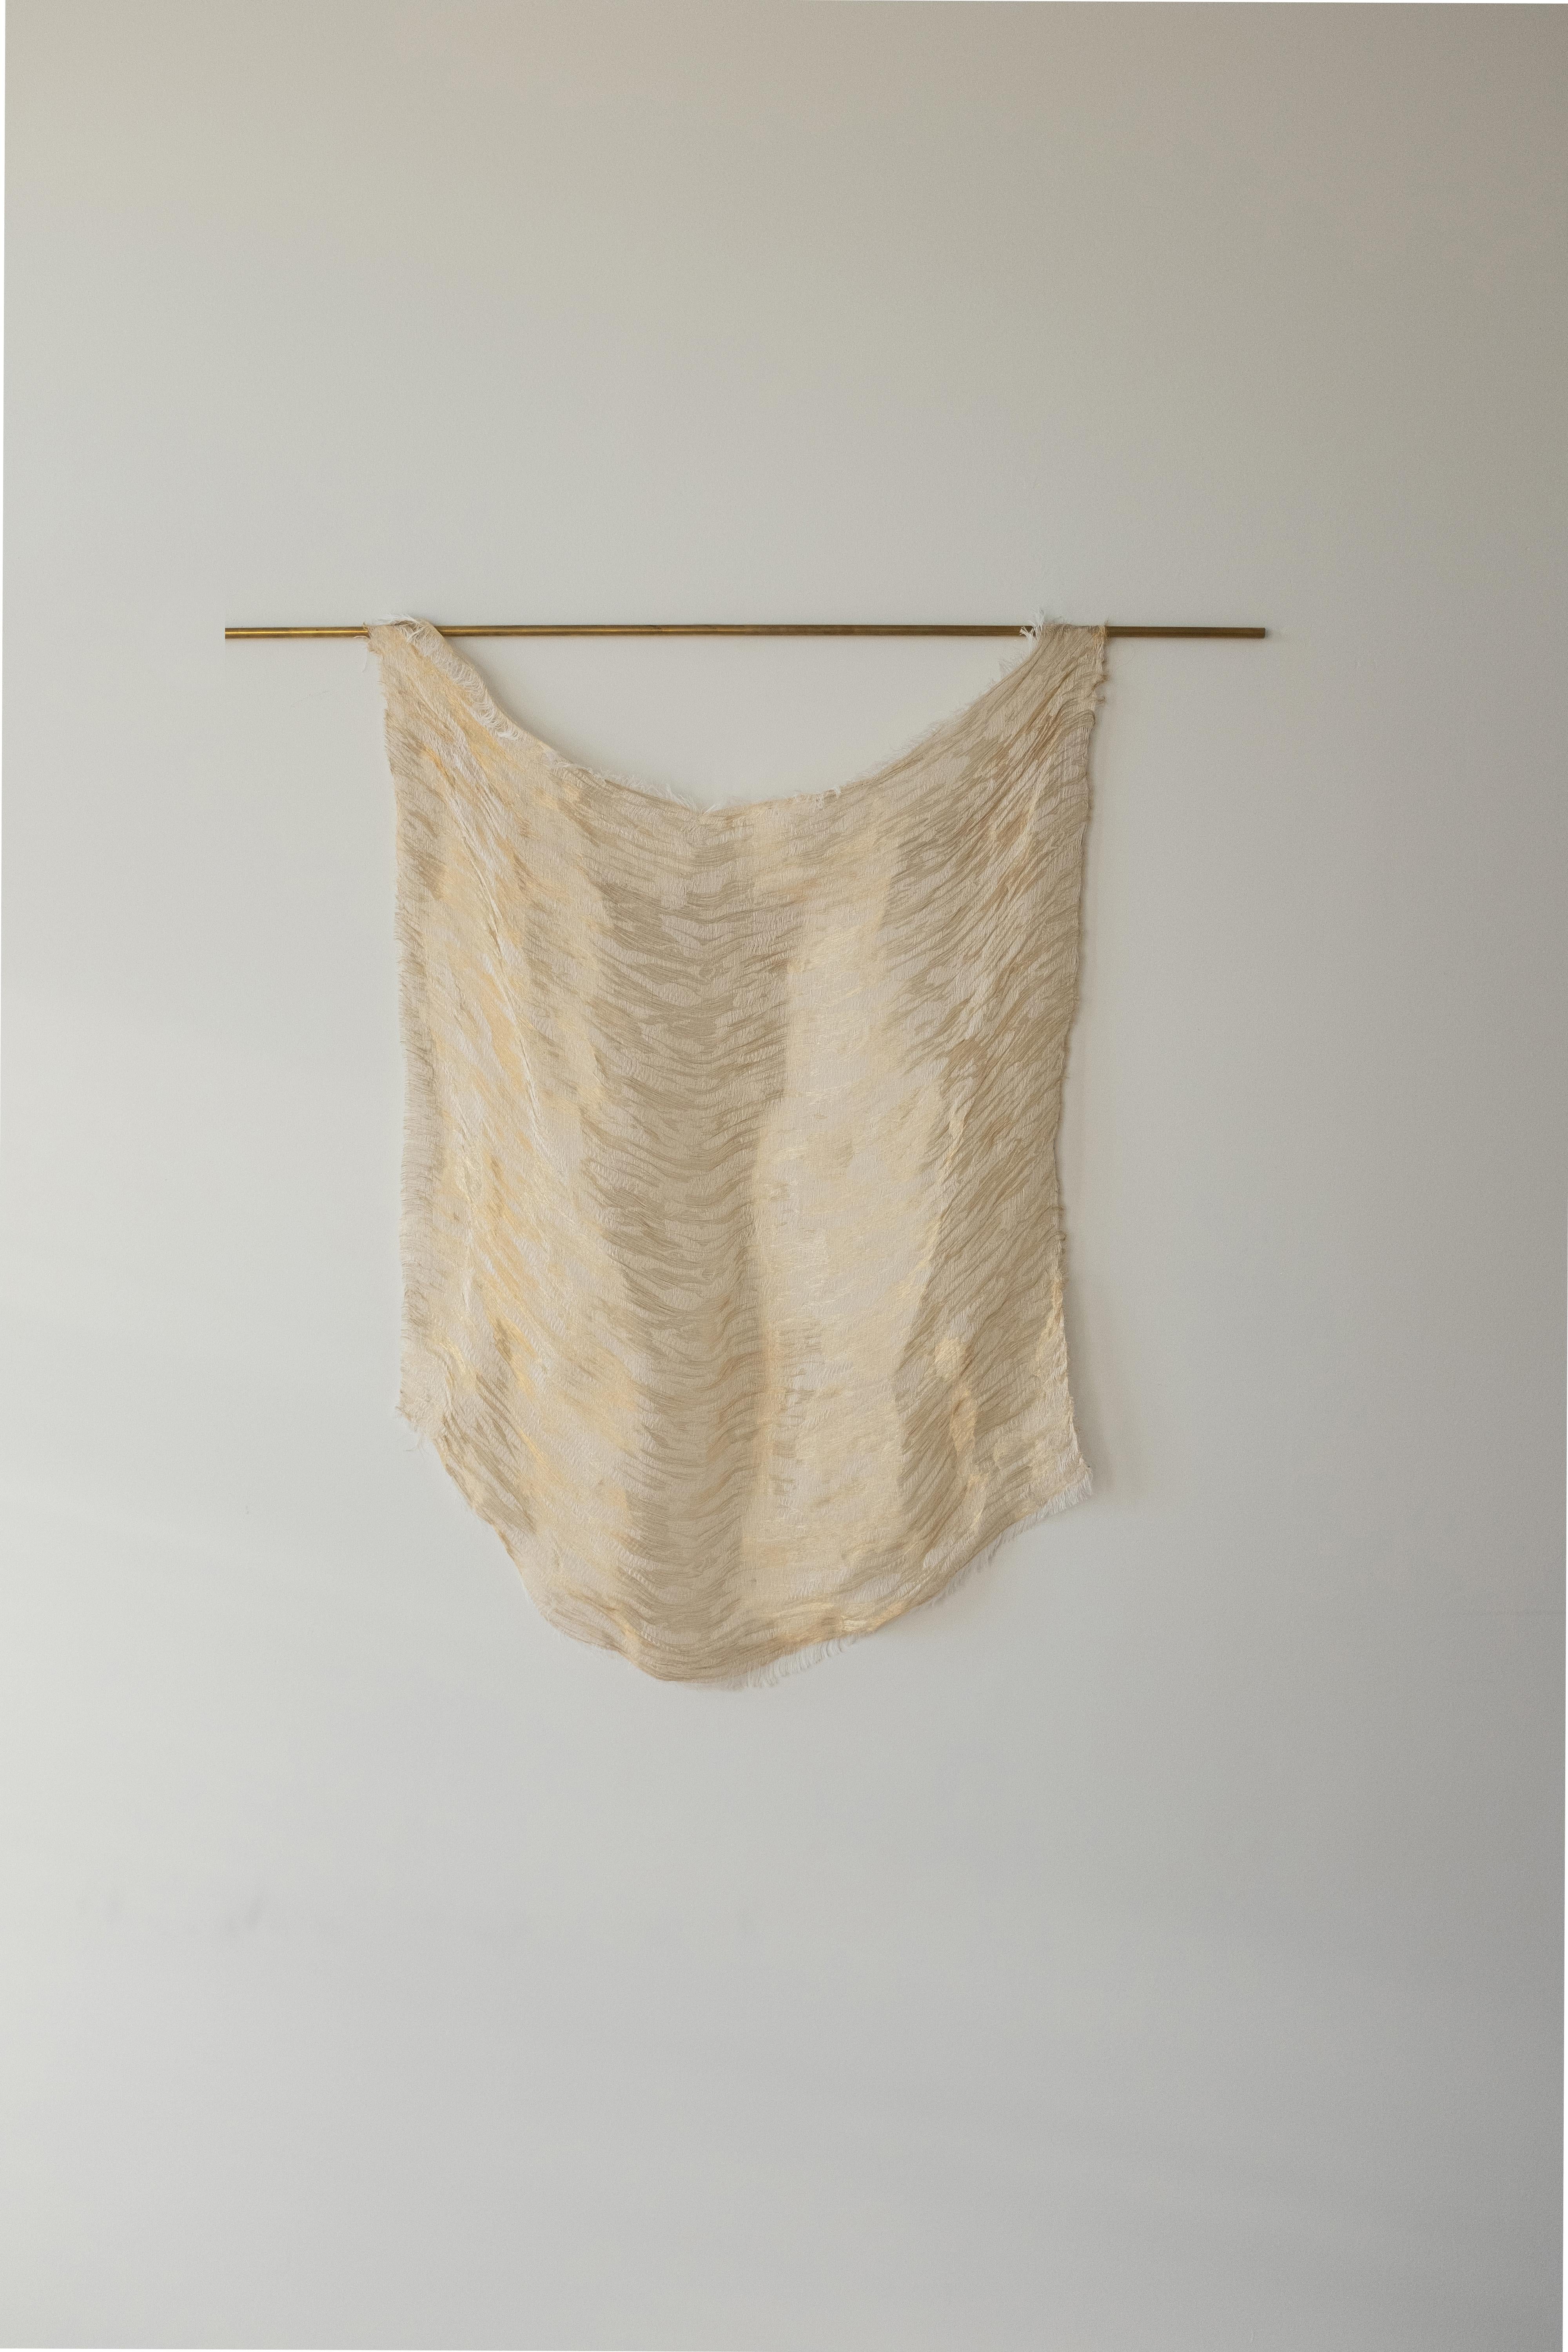 Arpeggi by Nathalie Van der Massen 
Dimensions: 100 x h 70 cm
Materials: Brass, bio cotton. 
Technique: Manually woven. Hand-crafted.

Arpeggi is a woven tapestry that plays with transparency and layers. With accents in brass threads that